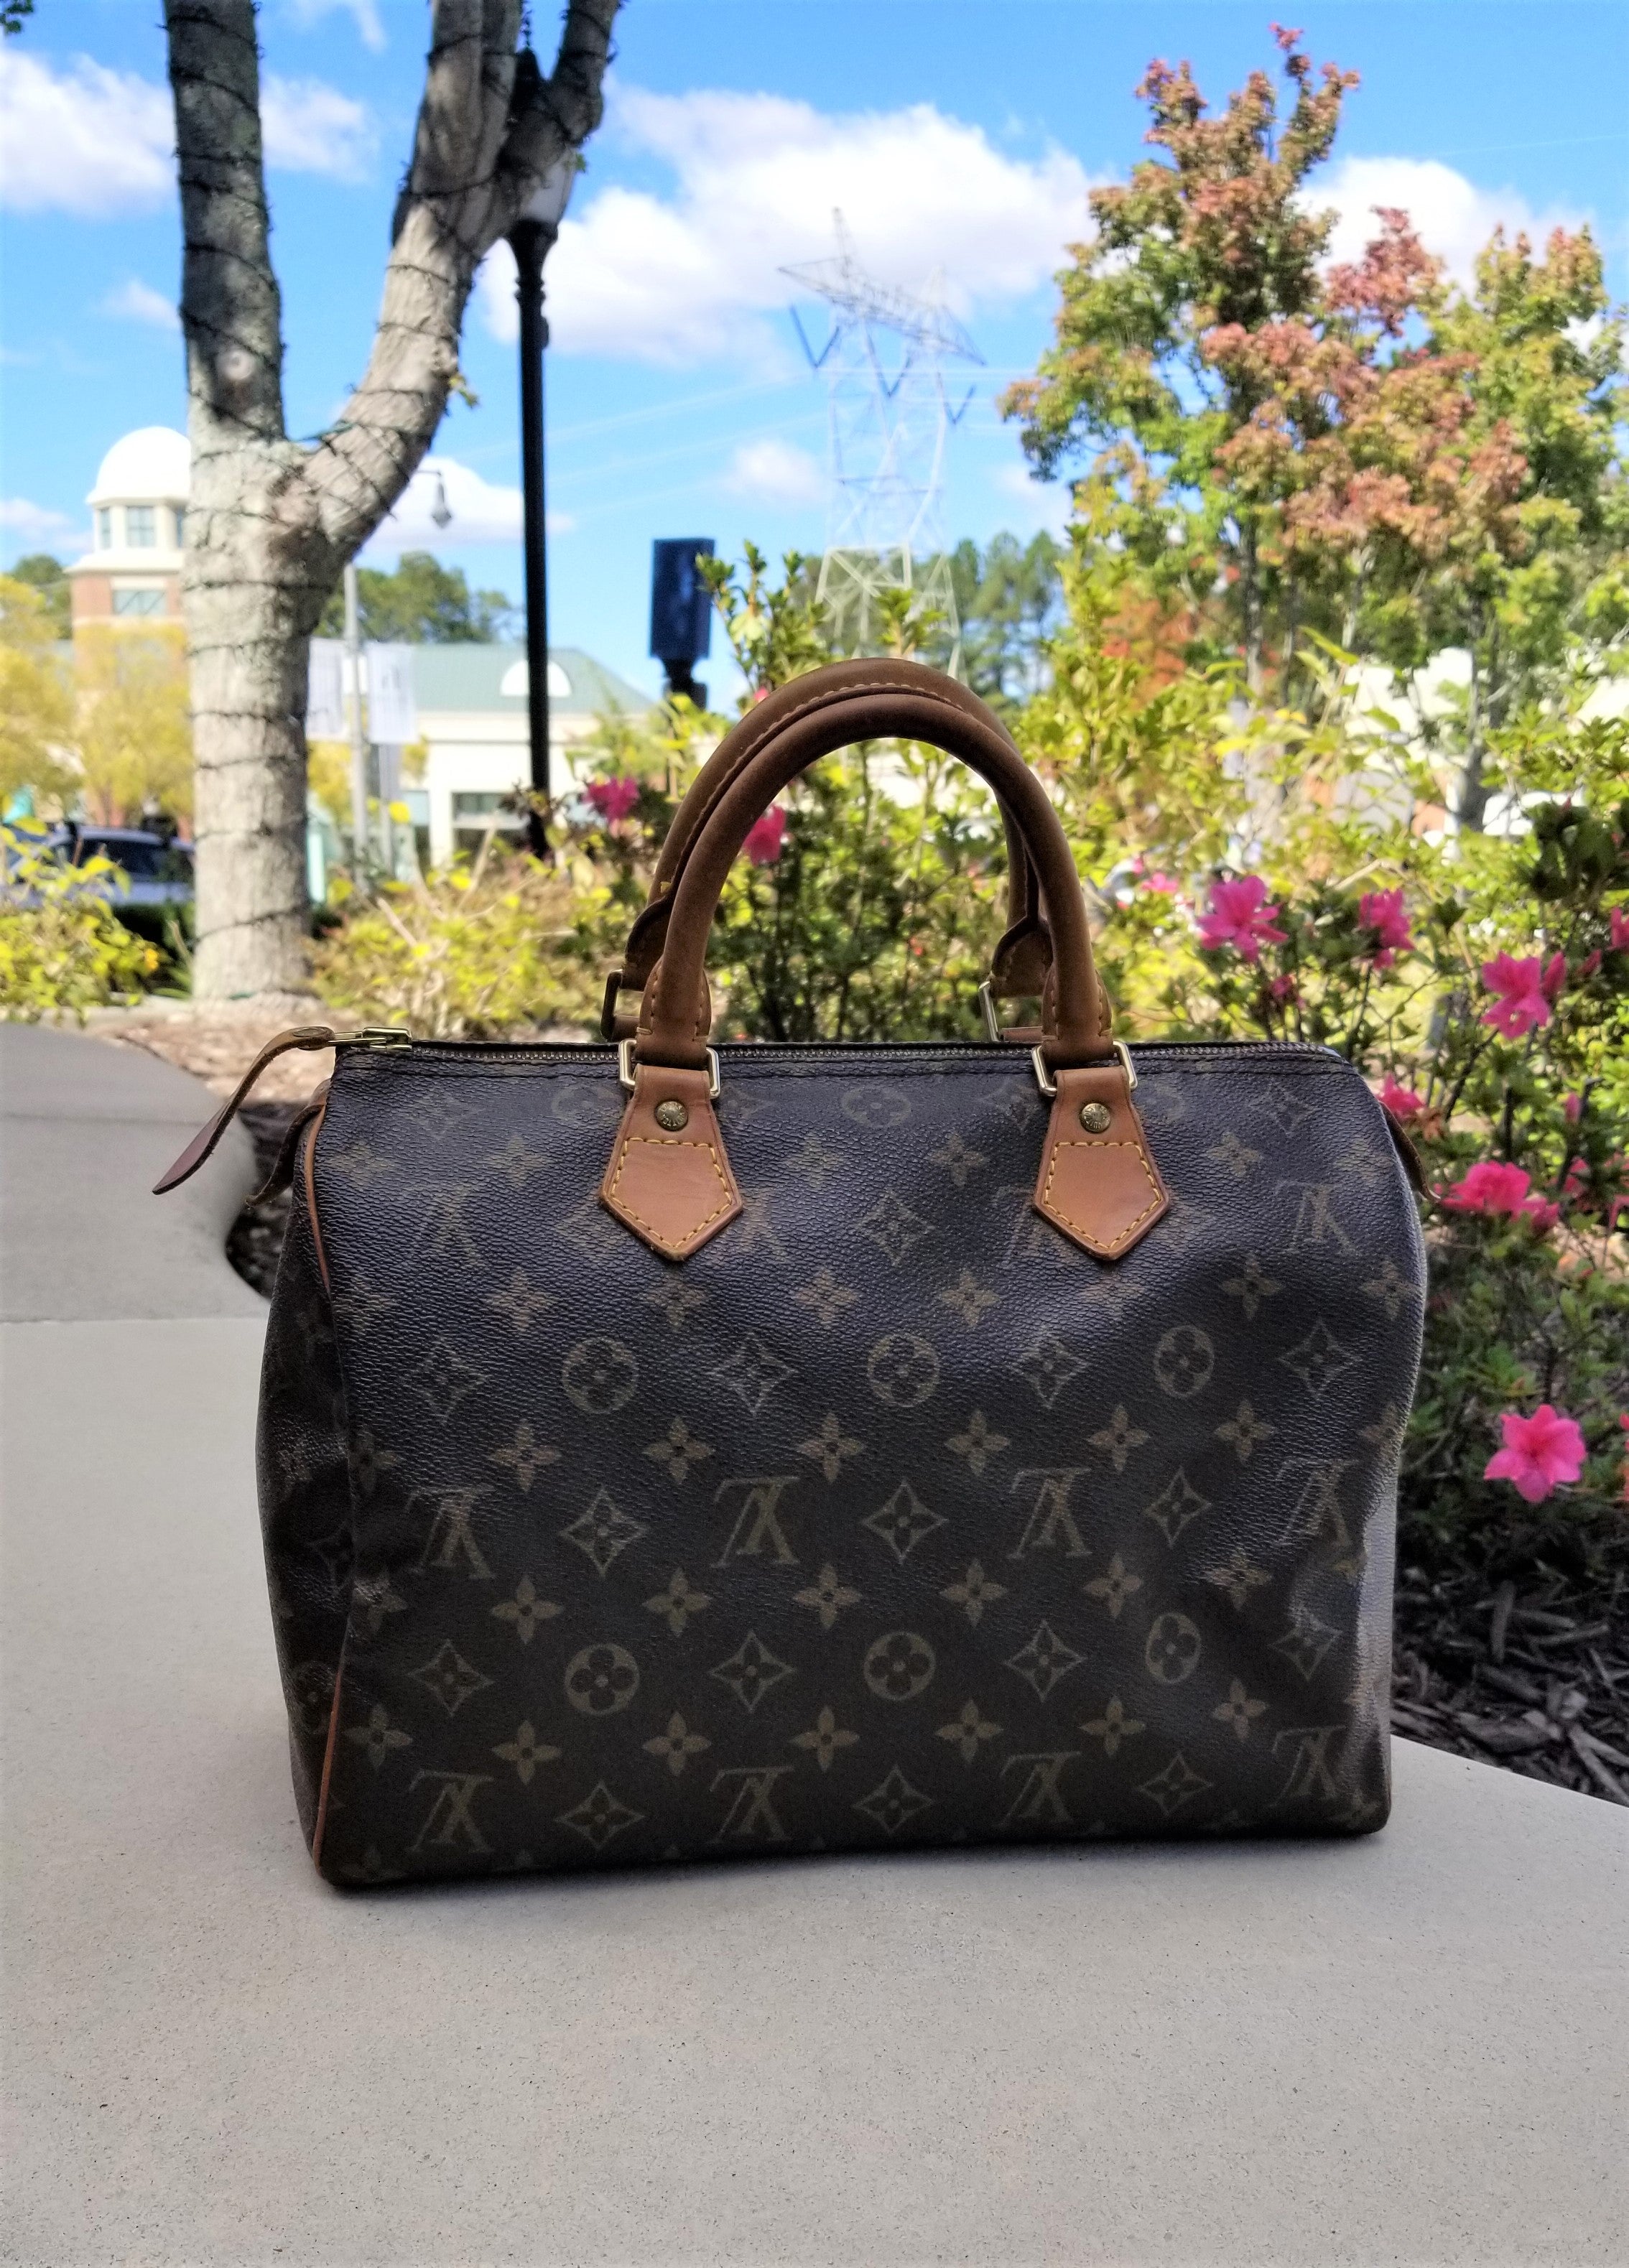 The Luxe Society on Instagram: Preloved Louis Vuitton Kensington Bowling  bag in good condition priced at $1549.99. Visit our new website at  shop.alexissuitcase.com or @alexissuitcase_buckhead for more details! FREE  SHIPPING on all